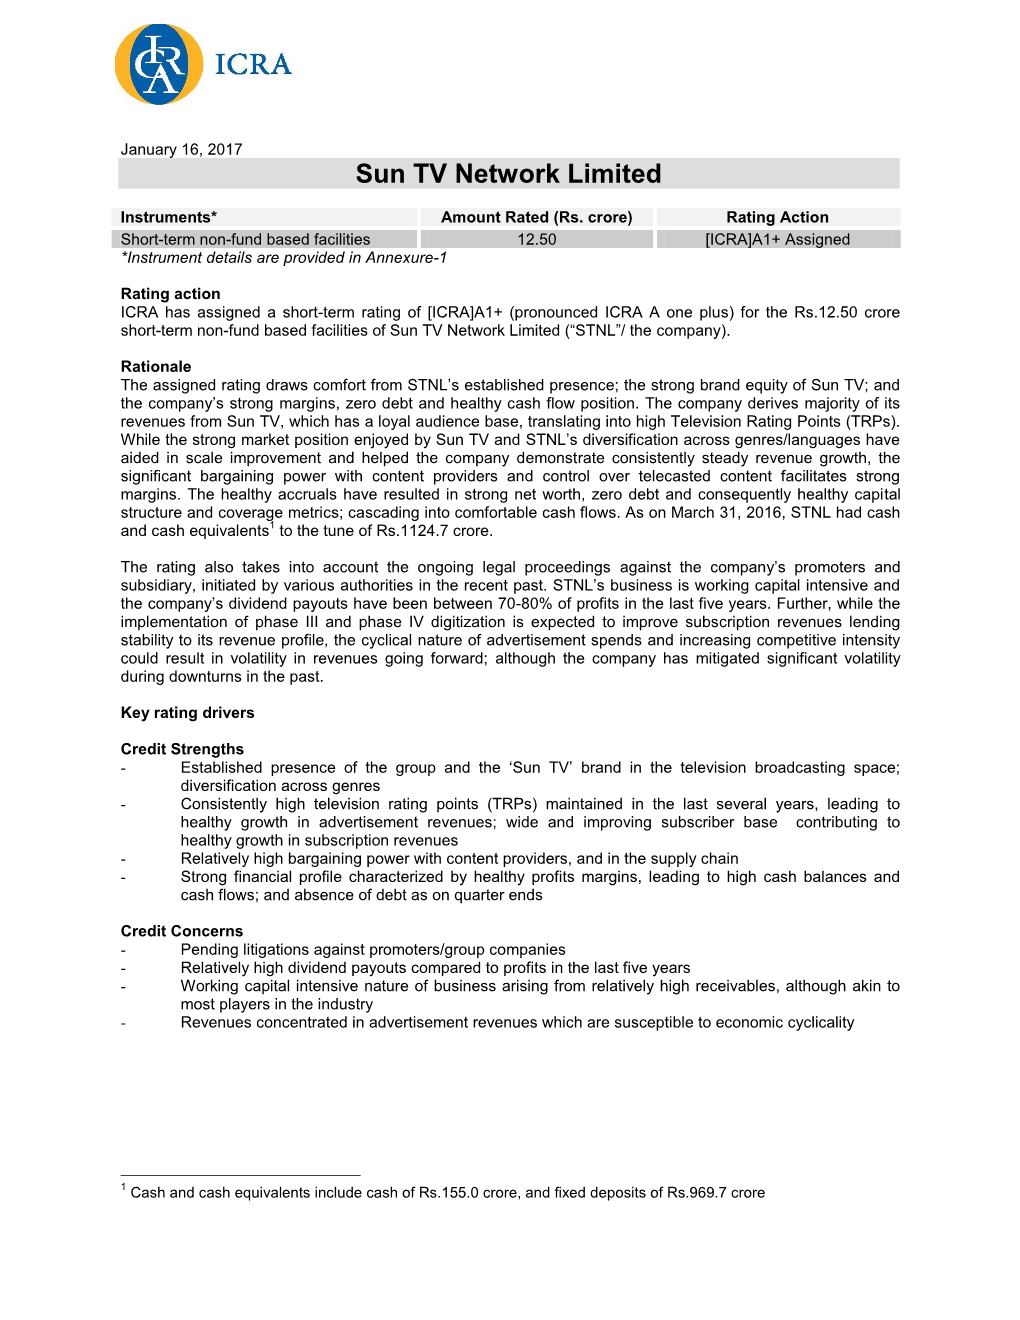 Sun TV Network Limited